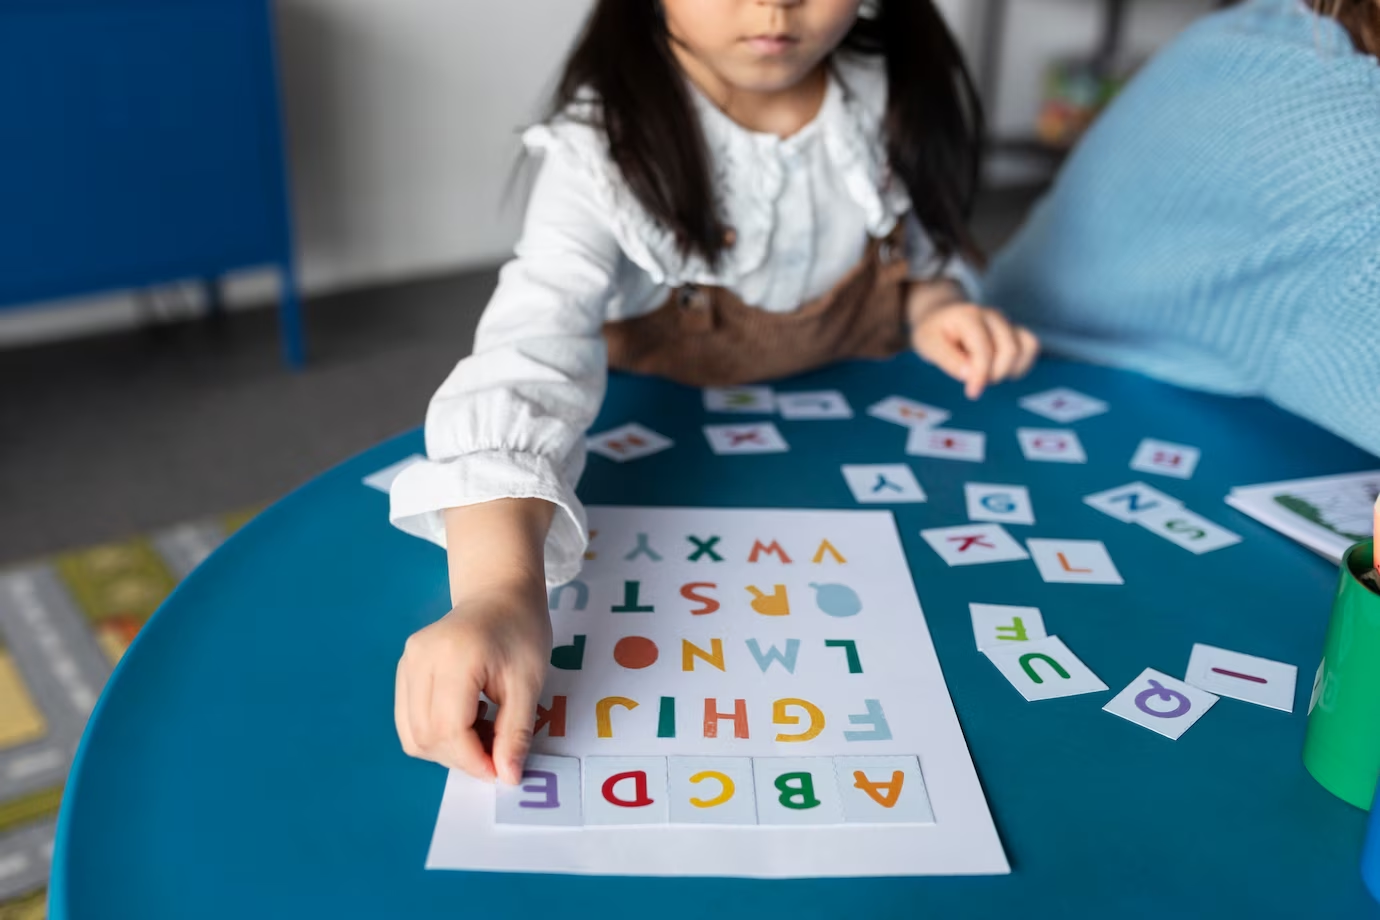 Phonics is being learned by a little girl